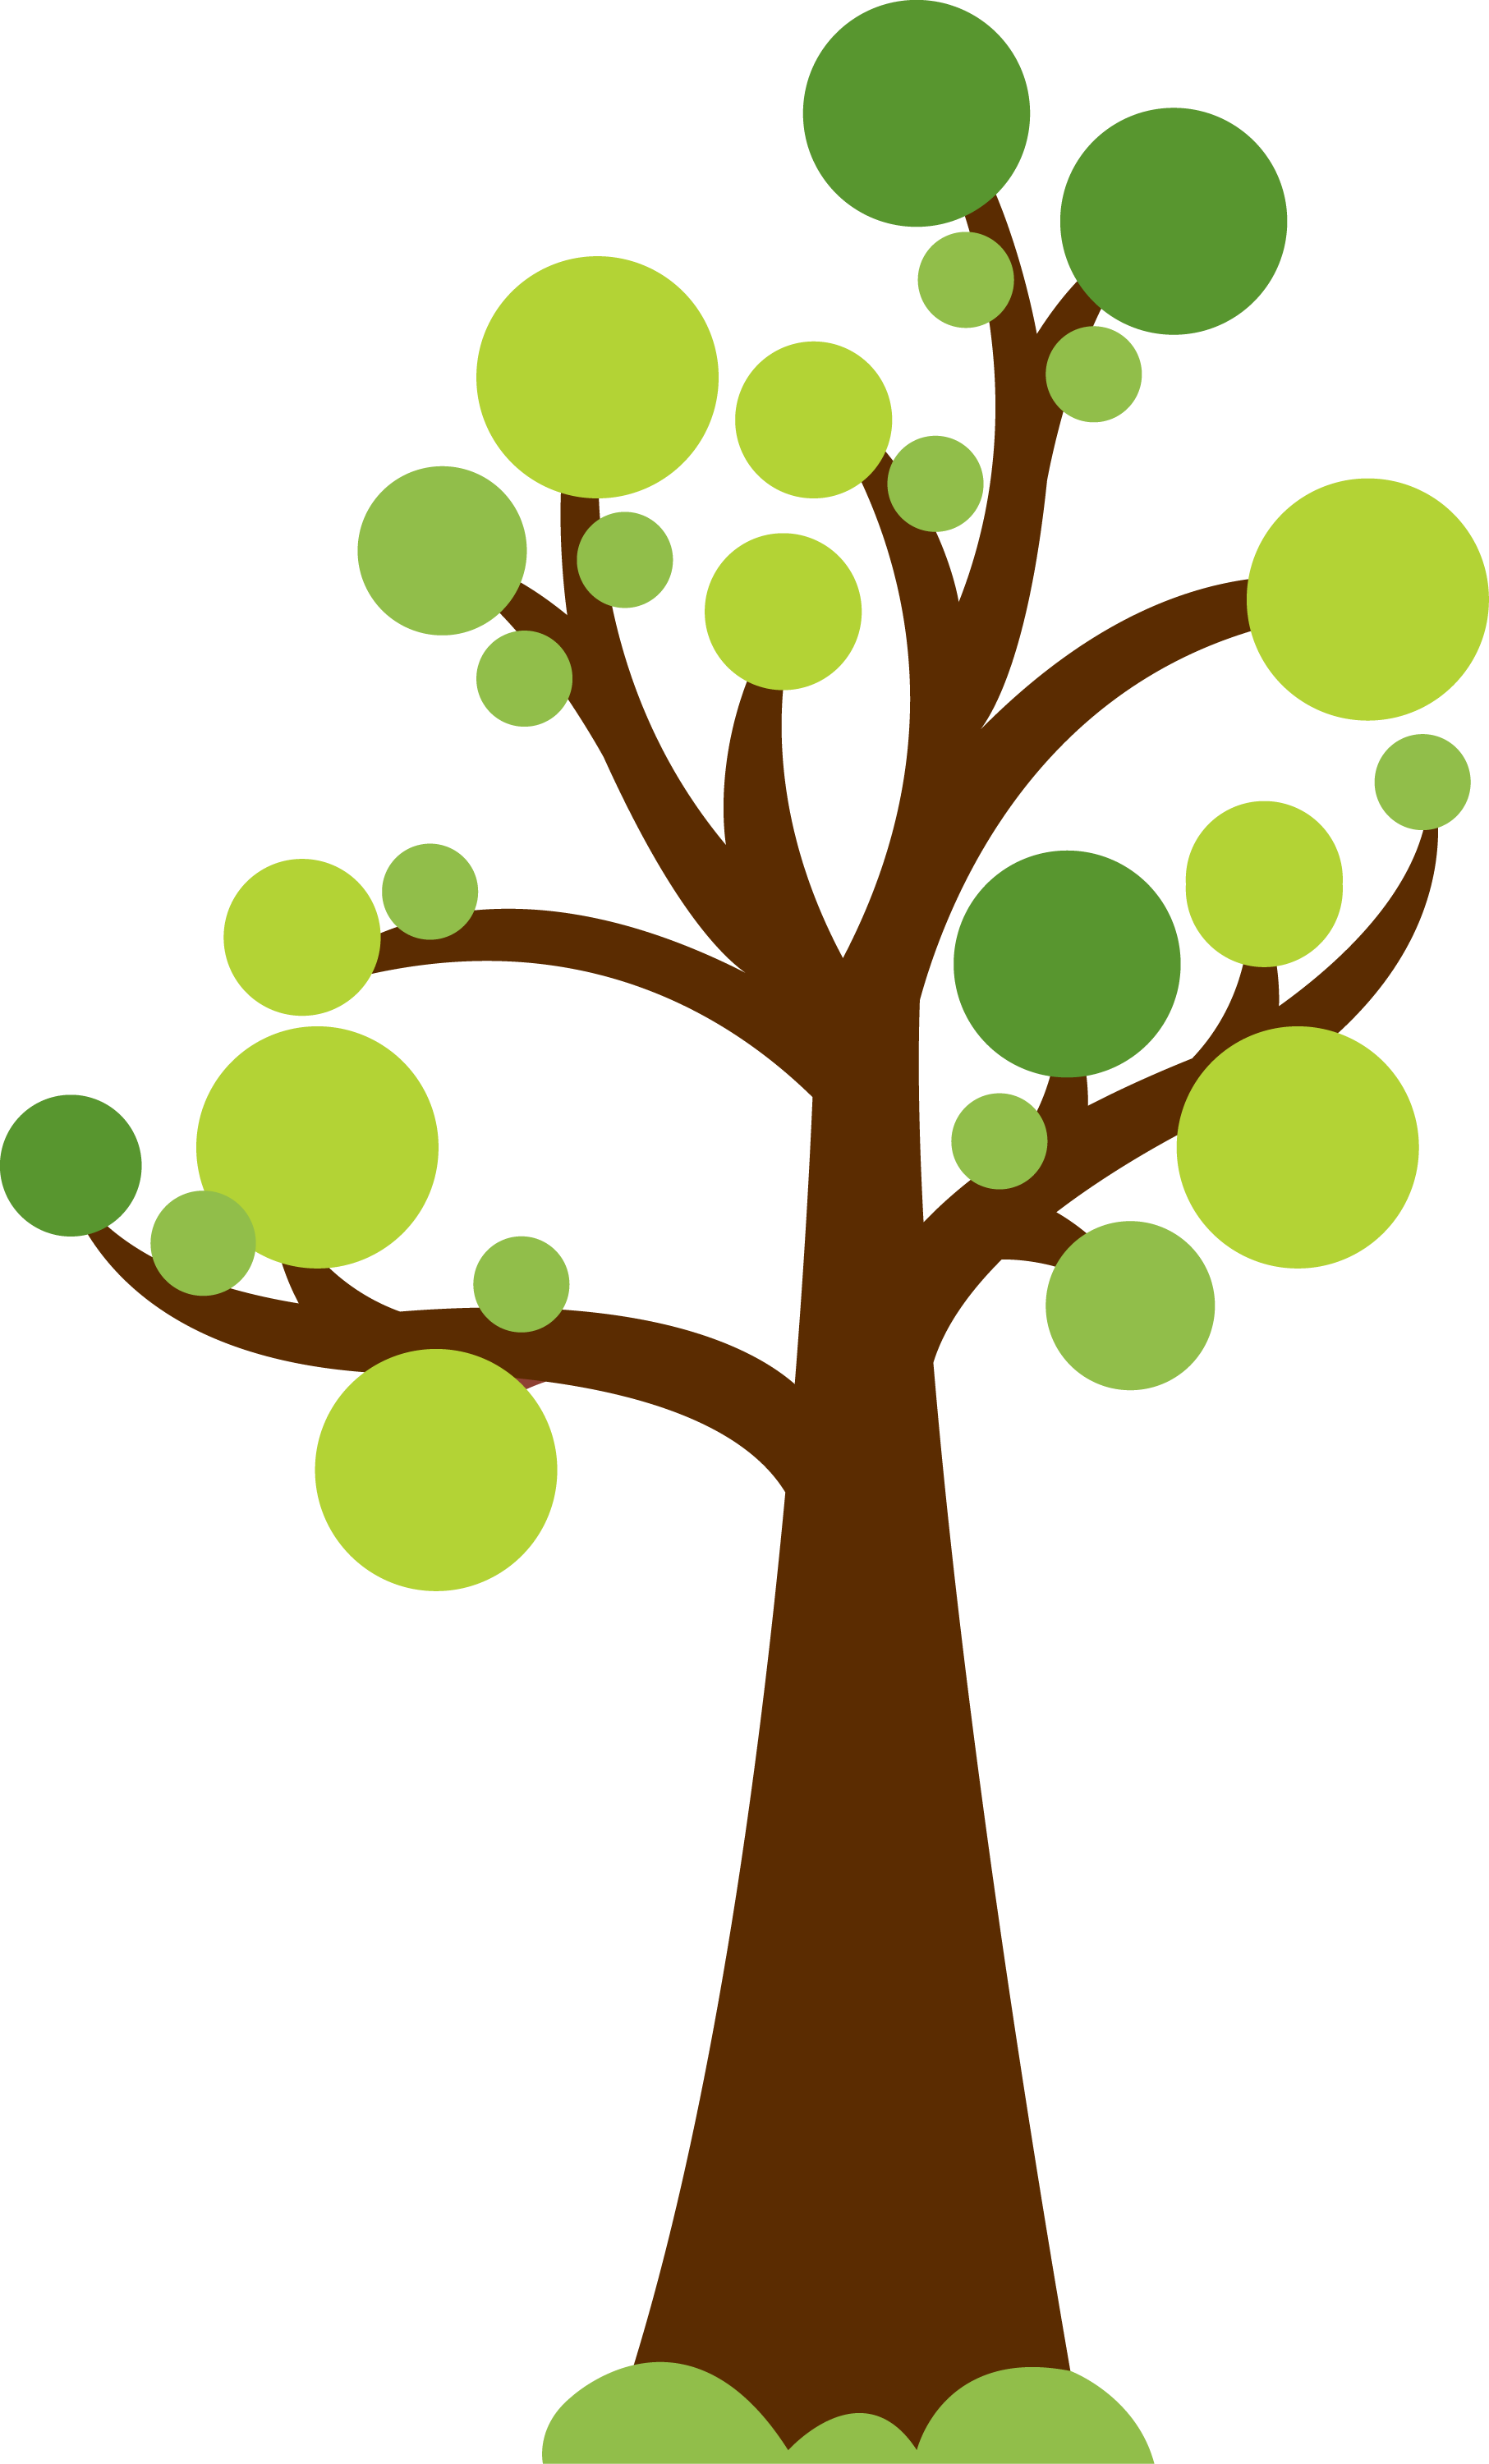 Tree with circles for leaves. Cute image for summer or garden theme ...